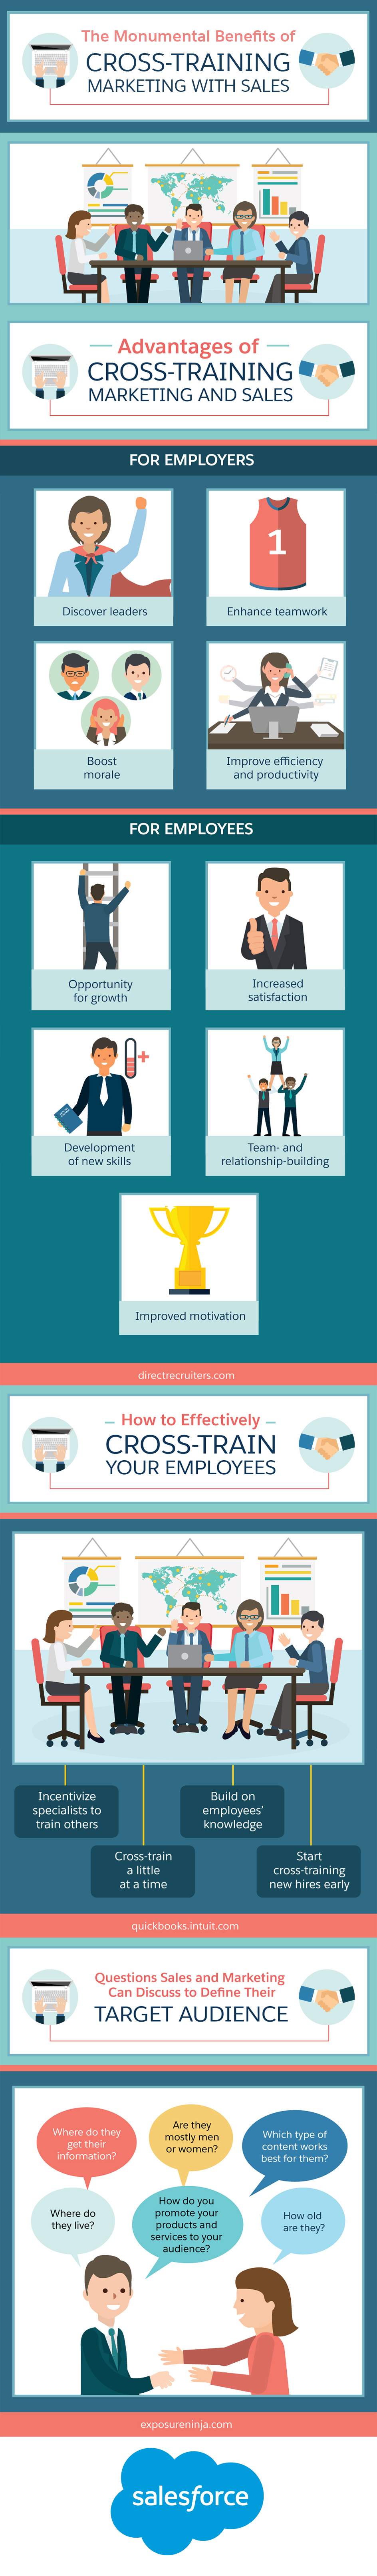 The Monumental Benefits of Cross-Training Marketing with Sales